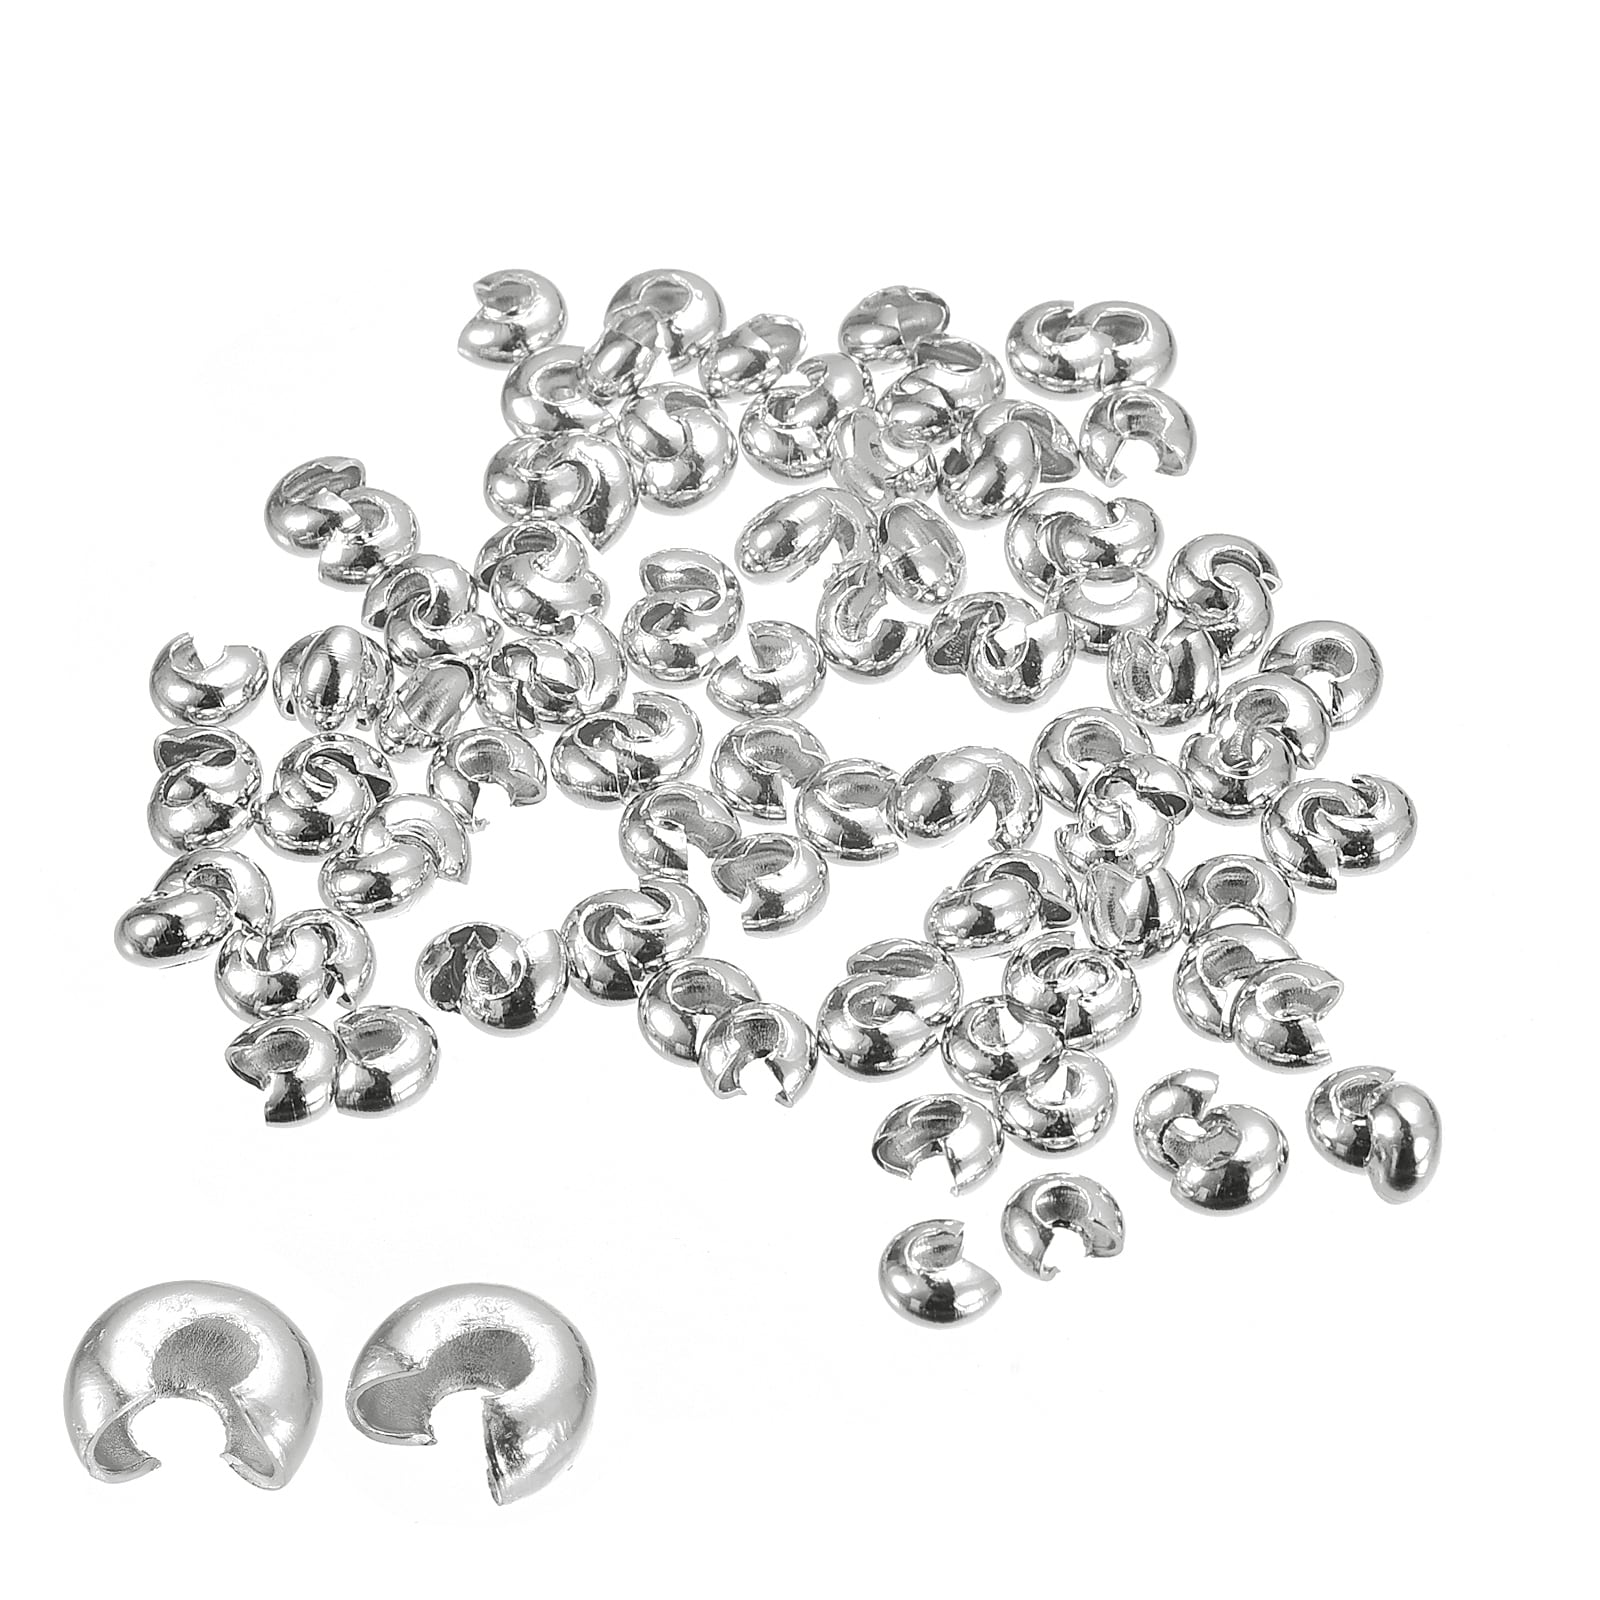 200Pcs Crimp Beads Covers Round Beads End Tips for Jewelry Making - Bed  Bath & Beyond - 37058665